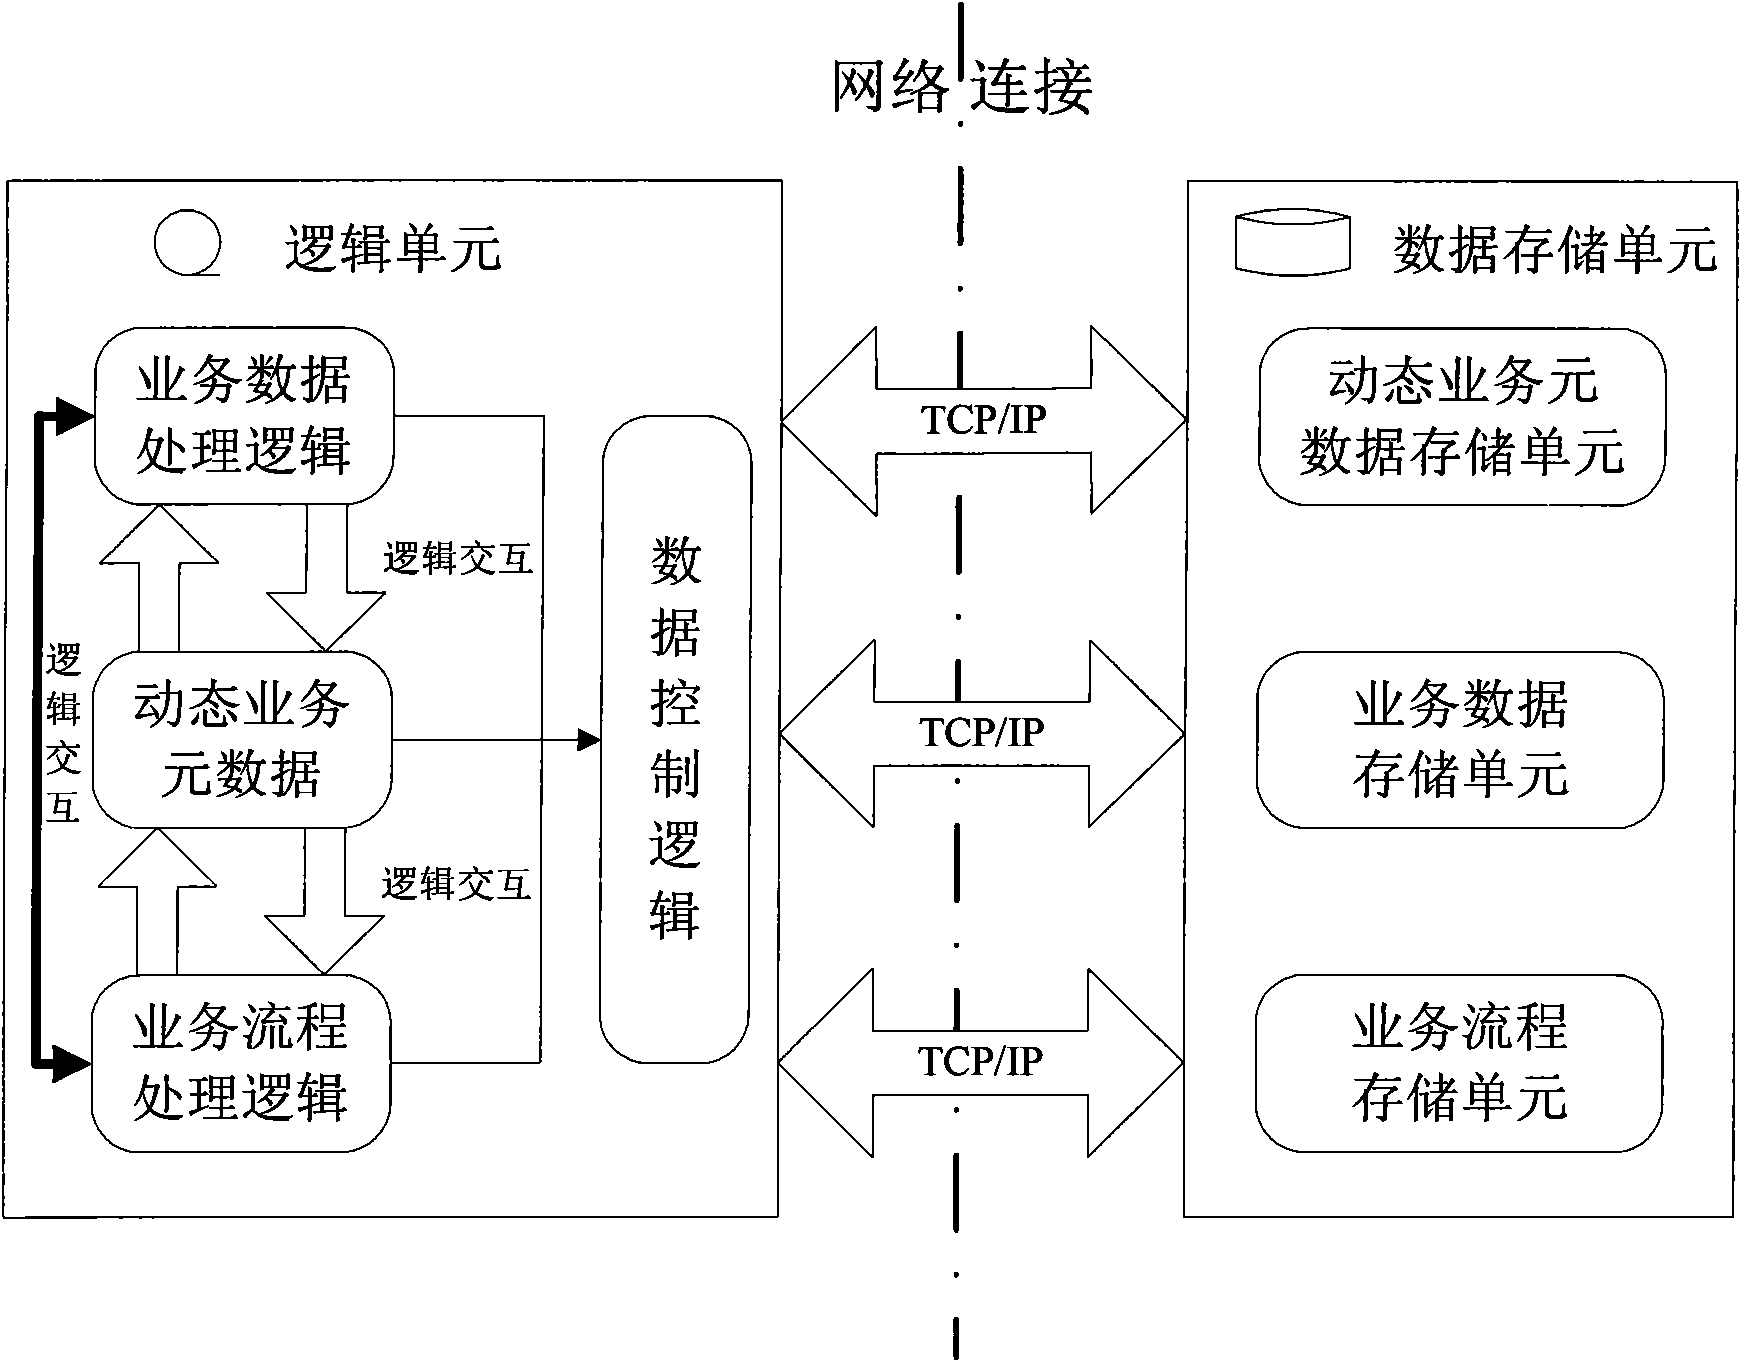 Application method of dynamic service creation in service system application software